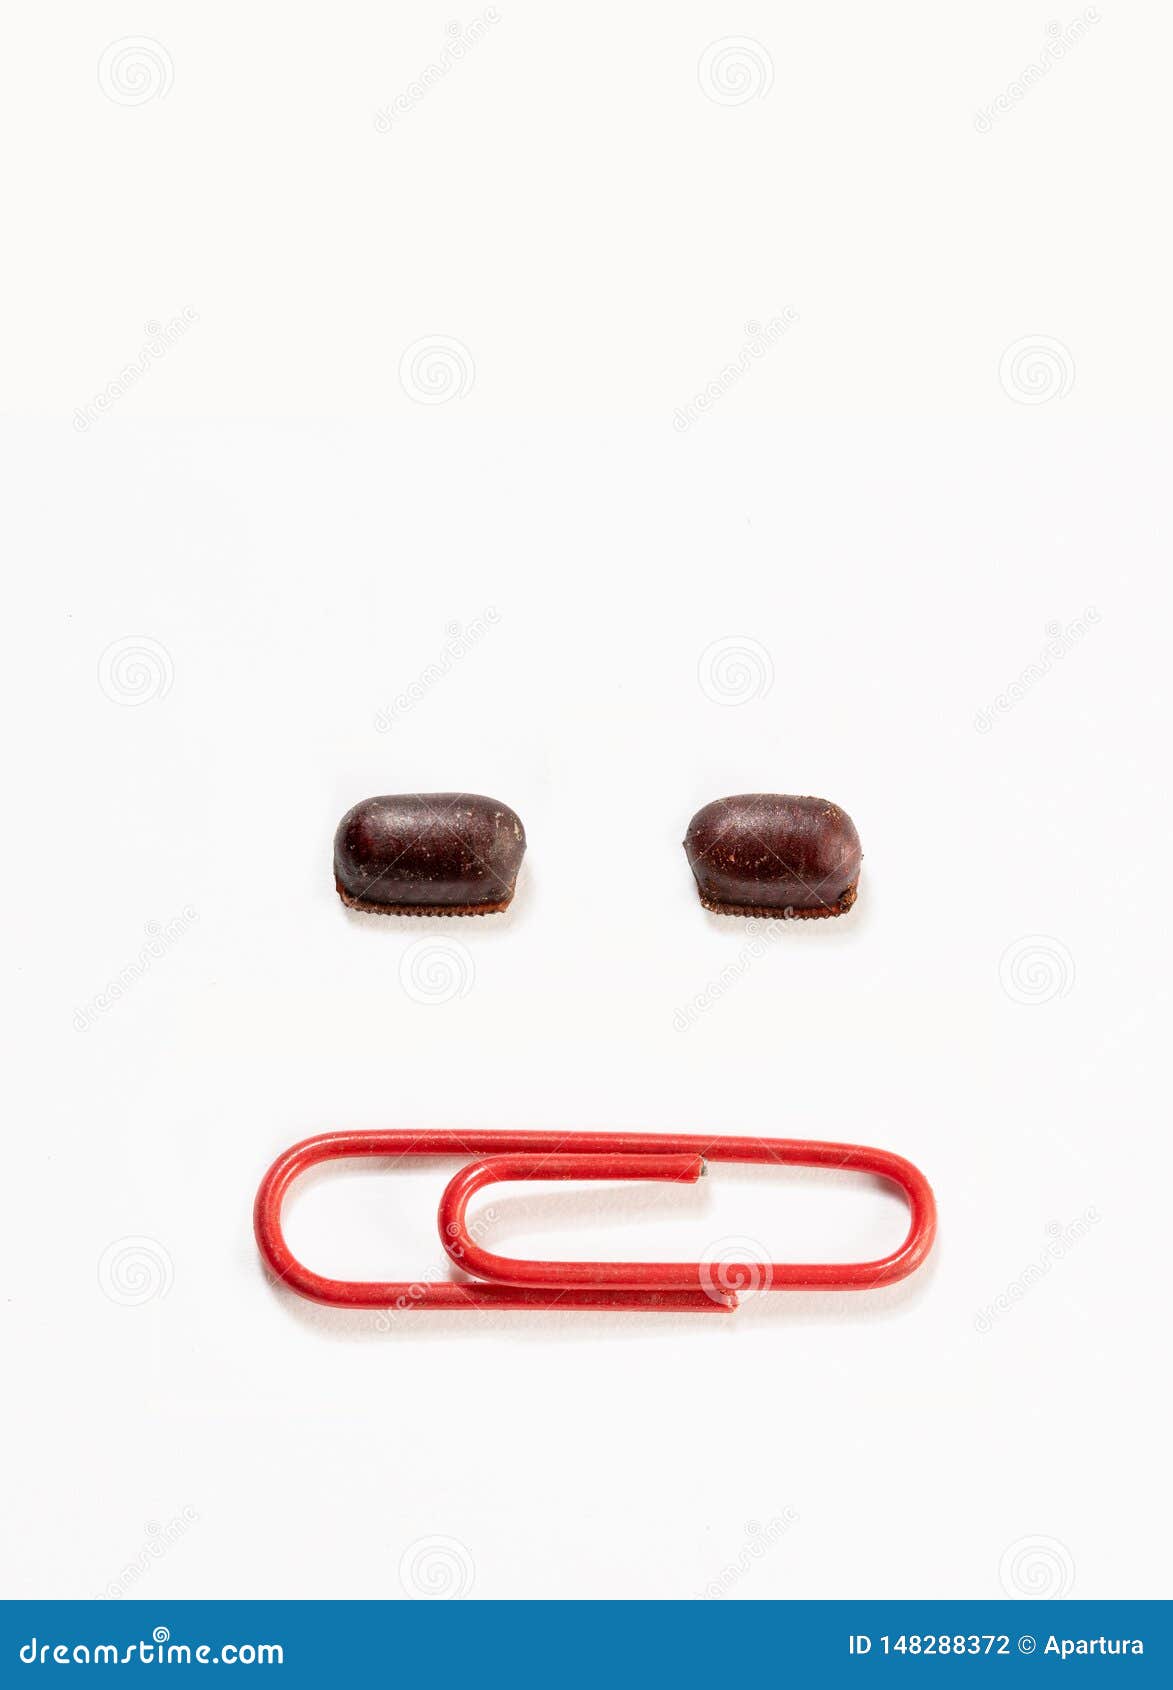 cockroach eggs size relative comparison between paper clip. two cockroach egg capsule and red paper clip